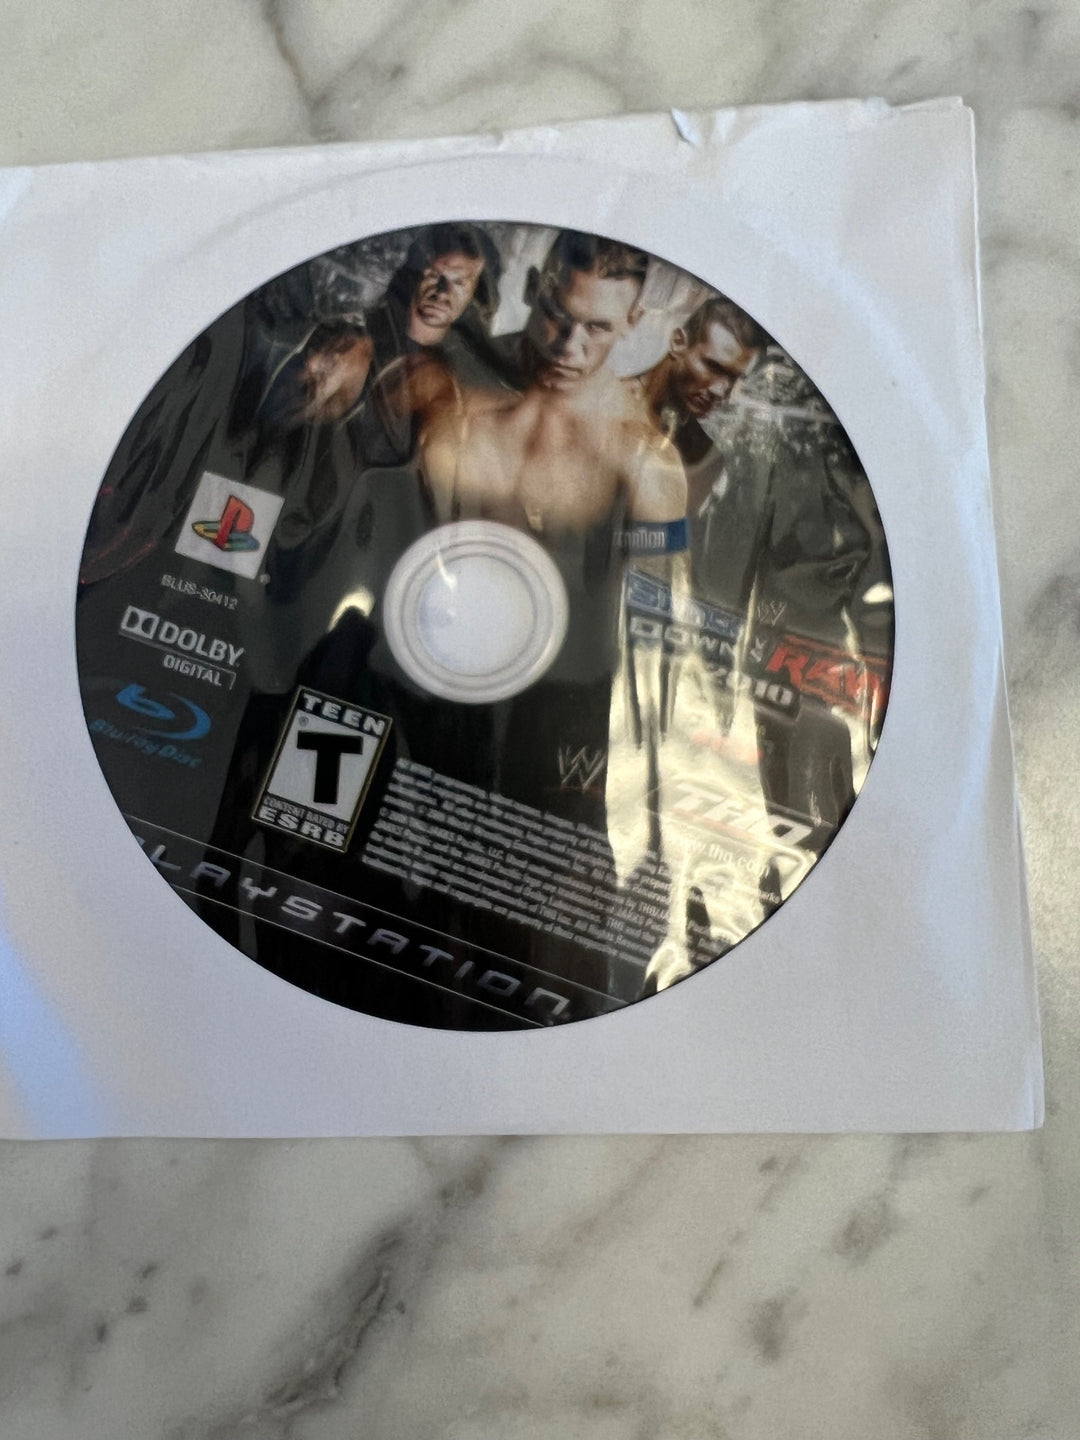 WWE Smackdown vs Raw 2010 for PS3 Playstation 3 Disc Only No Case/Manual DU62724